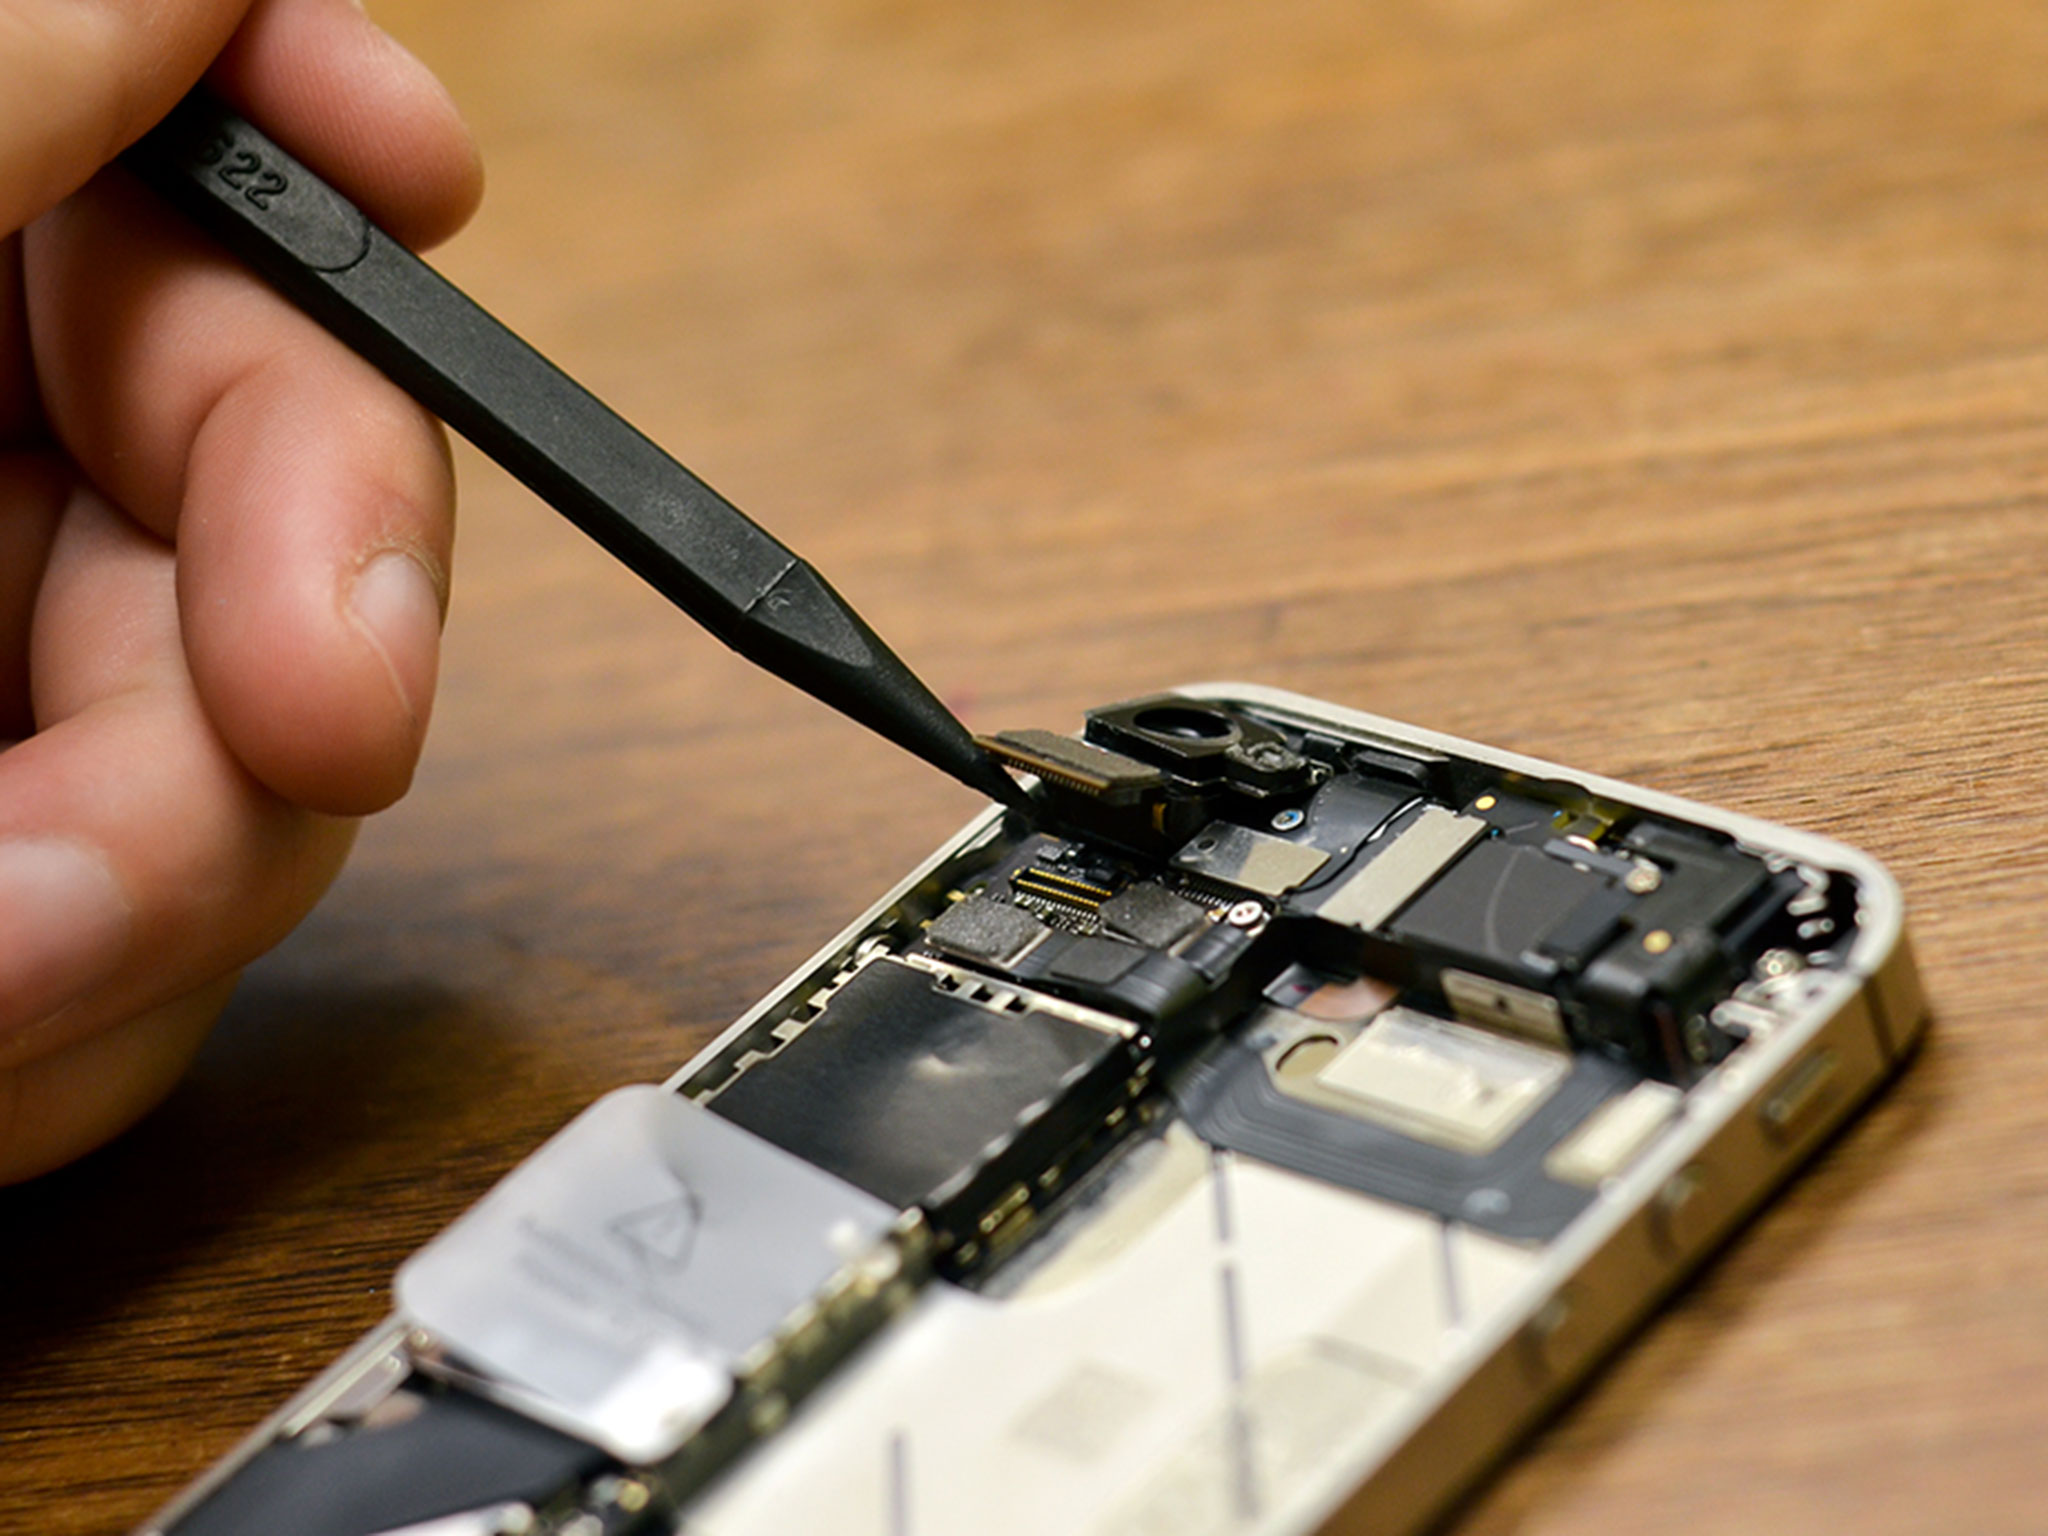 How to replace a broken rear camera in an iPhone 4